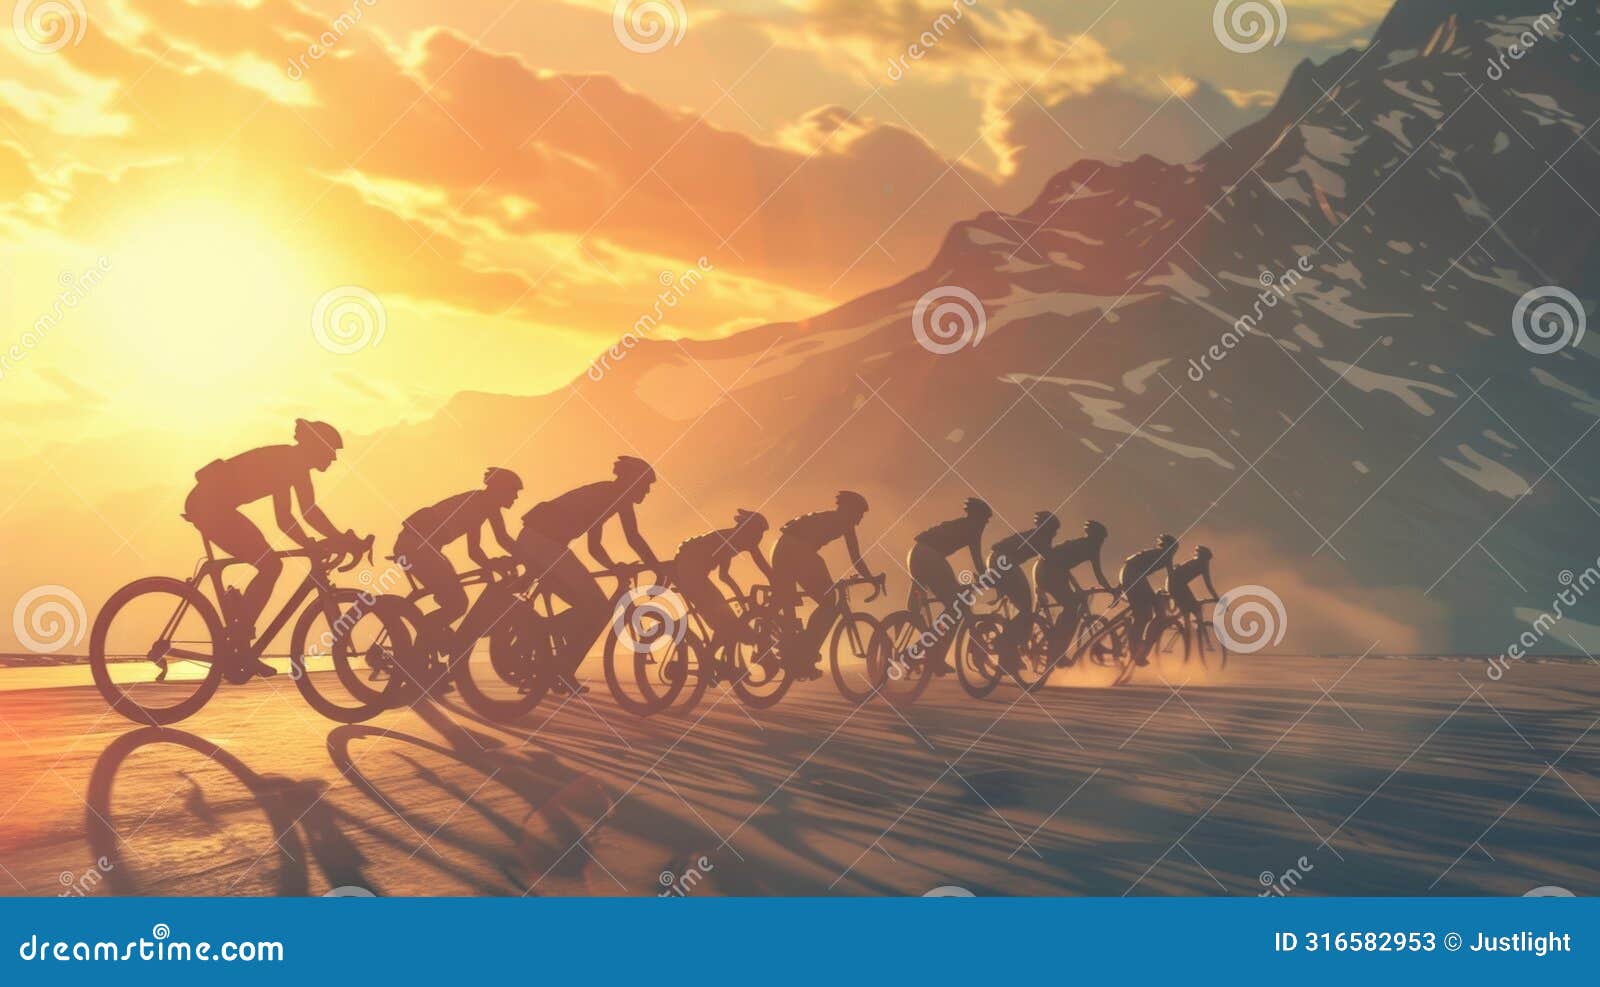 a group of highend cyclists riding in unison with the sun shining behind them and a breathtaking mountain range in the